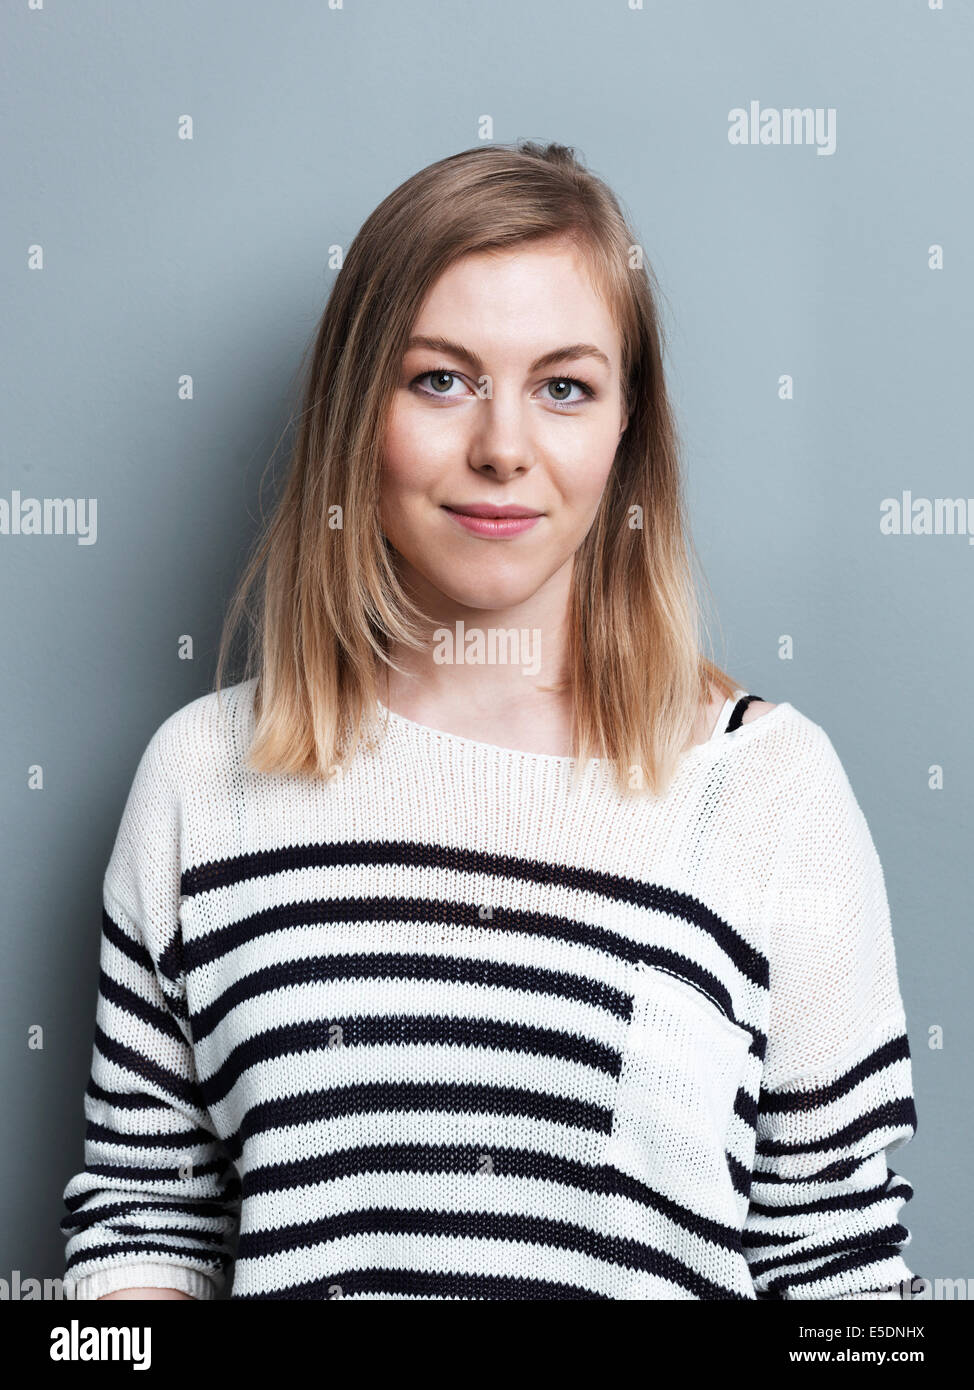 Portrait of blond woman in front of gray background Stock Photo